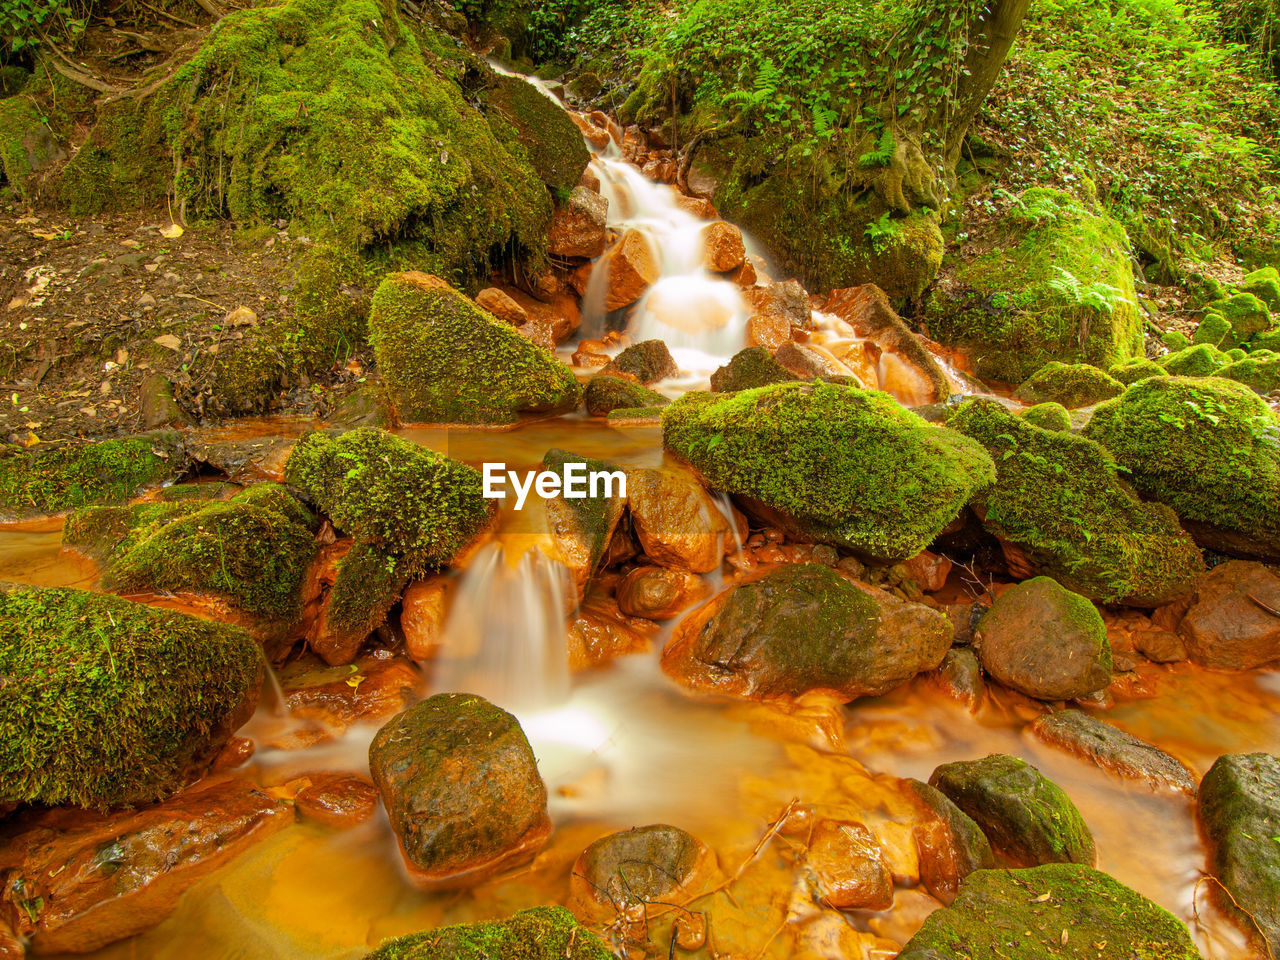 View of mineral waterfall in forest, falling streams over stone with ferric surface